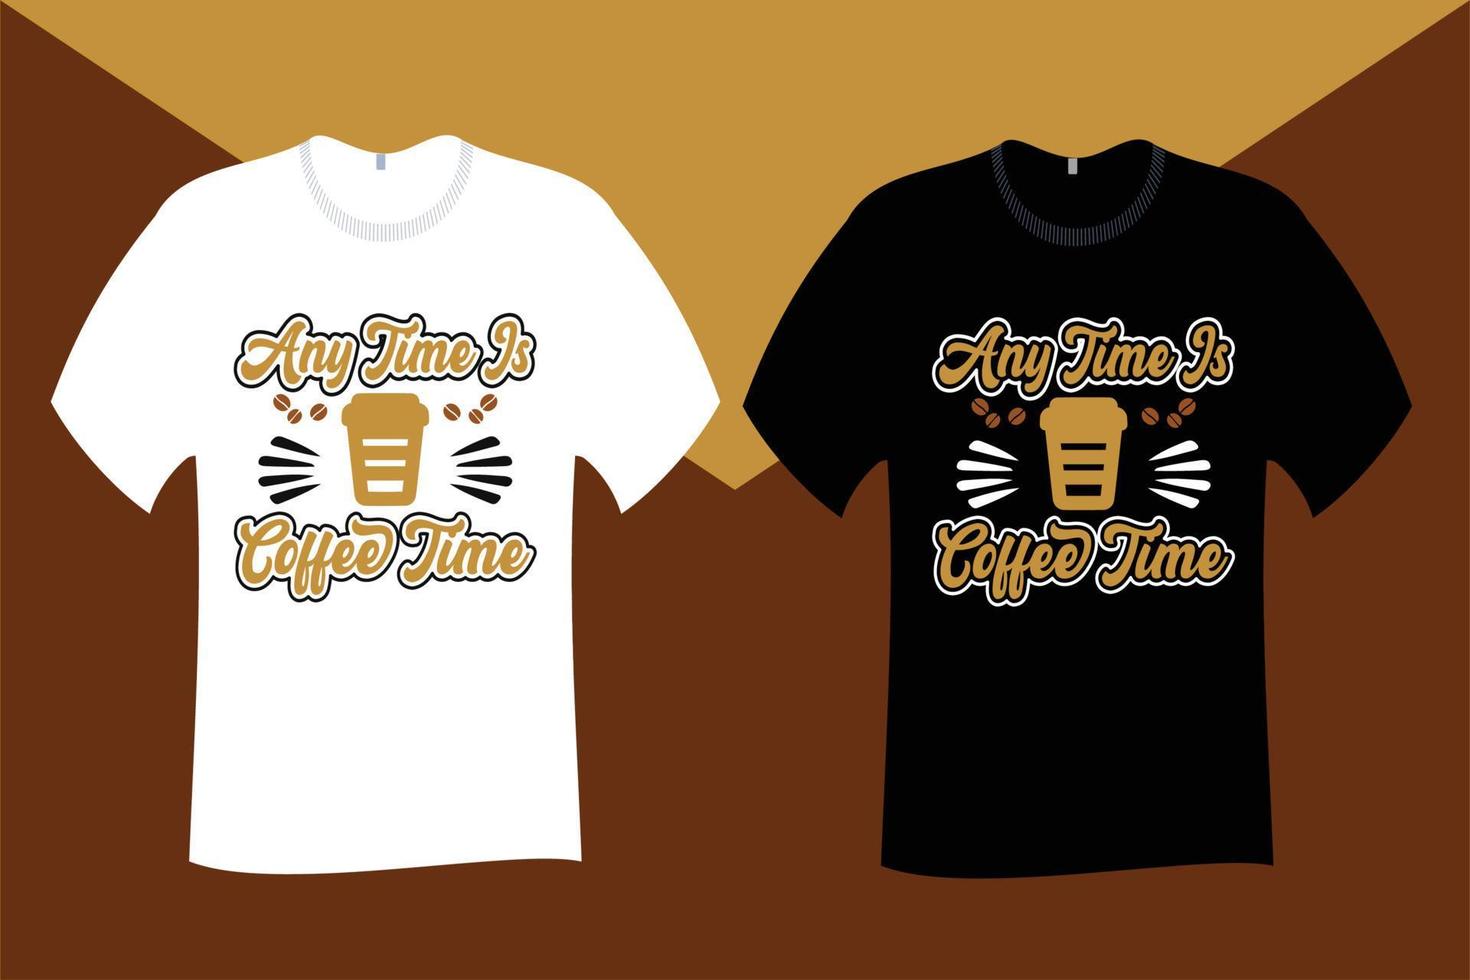 Any time is coffee time T Shirt Design vector